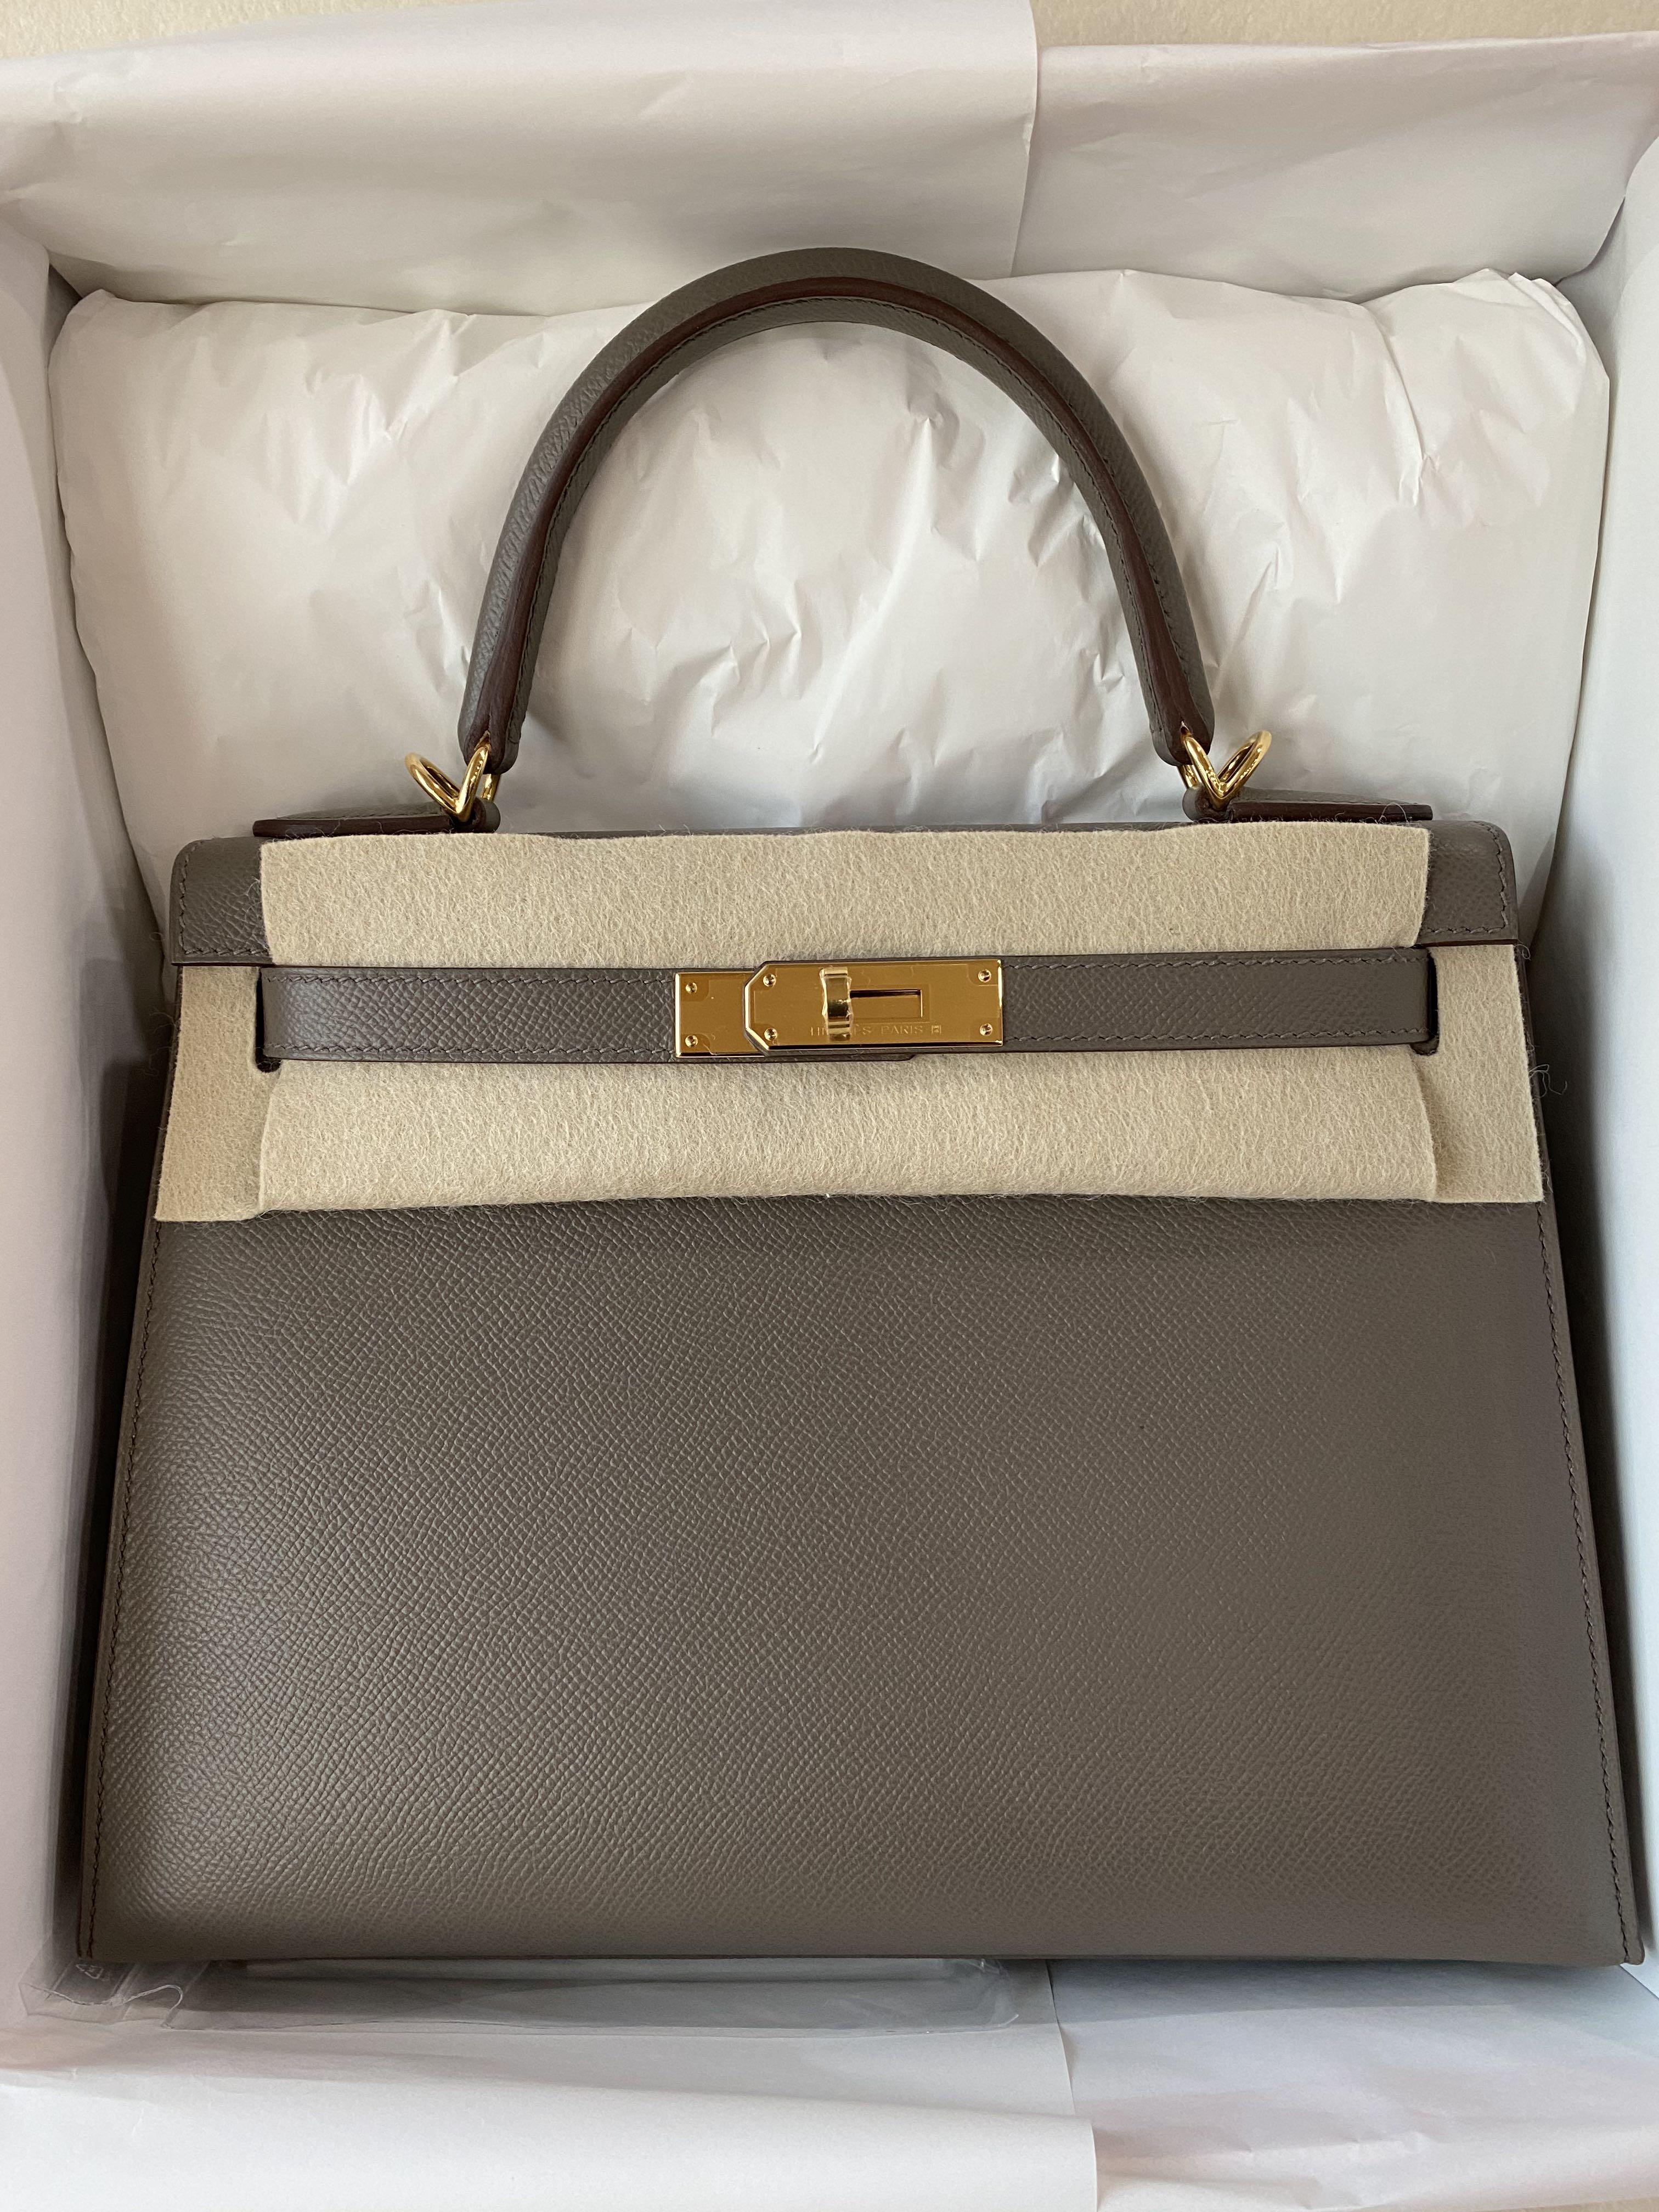 A Hermes Kelly 25 Retourne Gris Mouette Bag, Boxed full Set for sale at  auction on 20th October